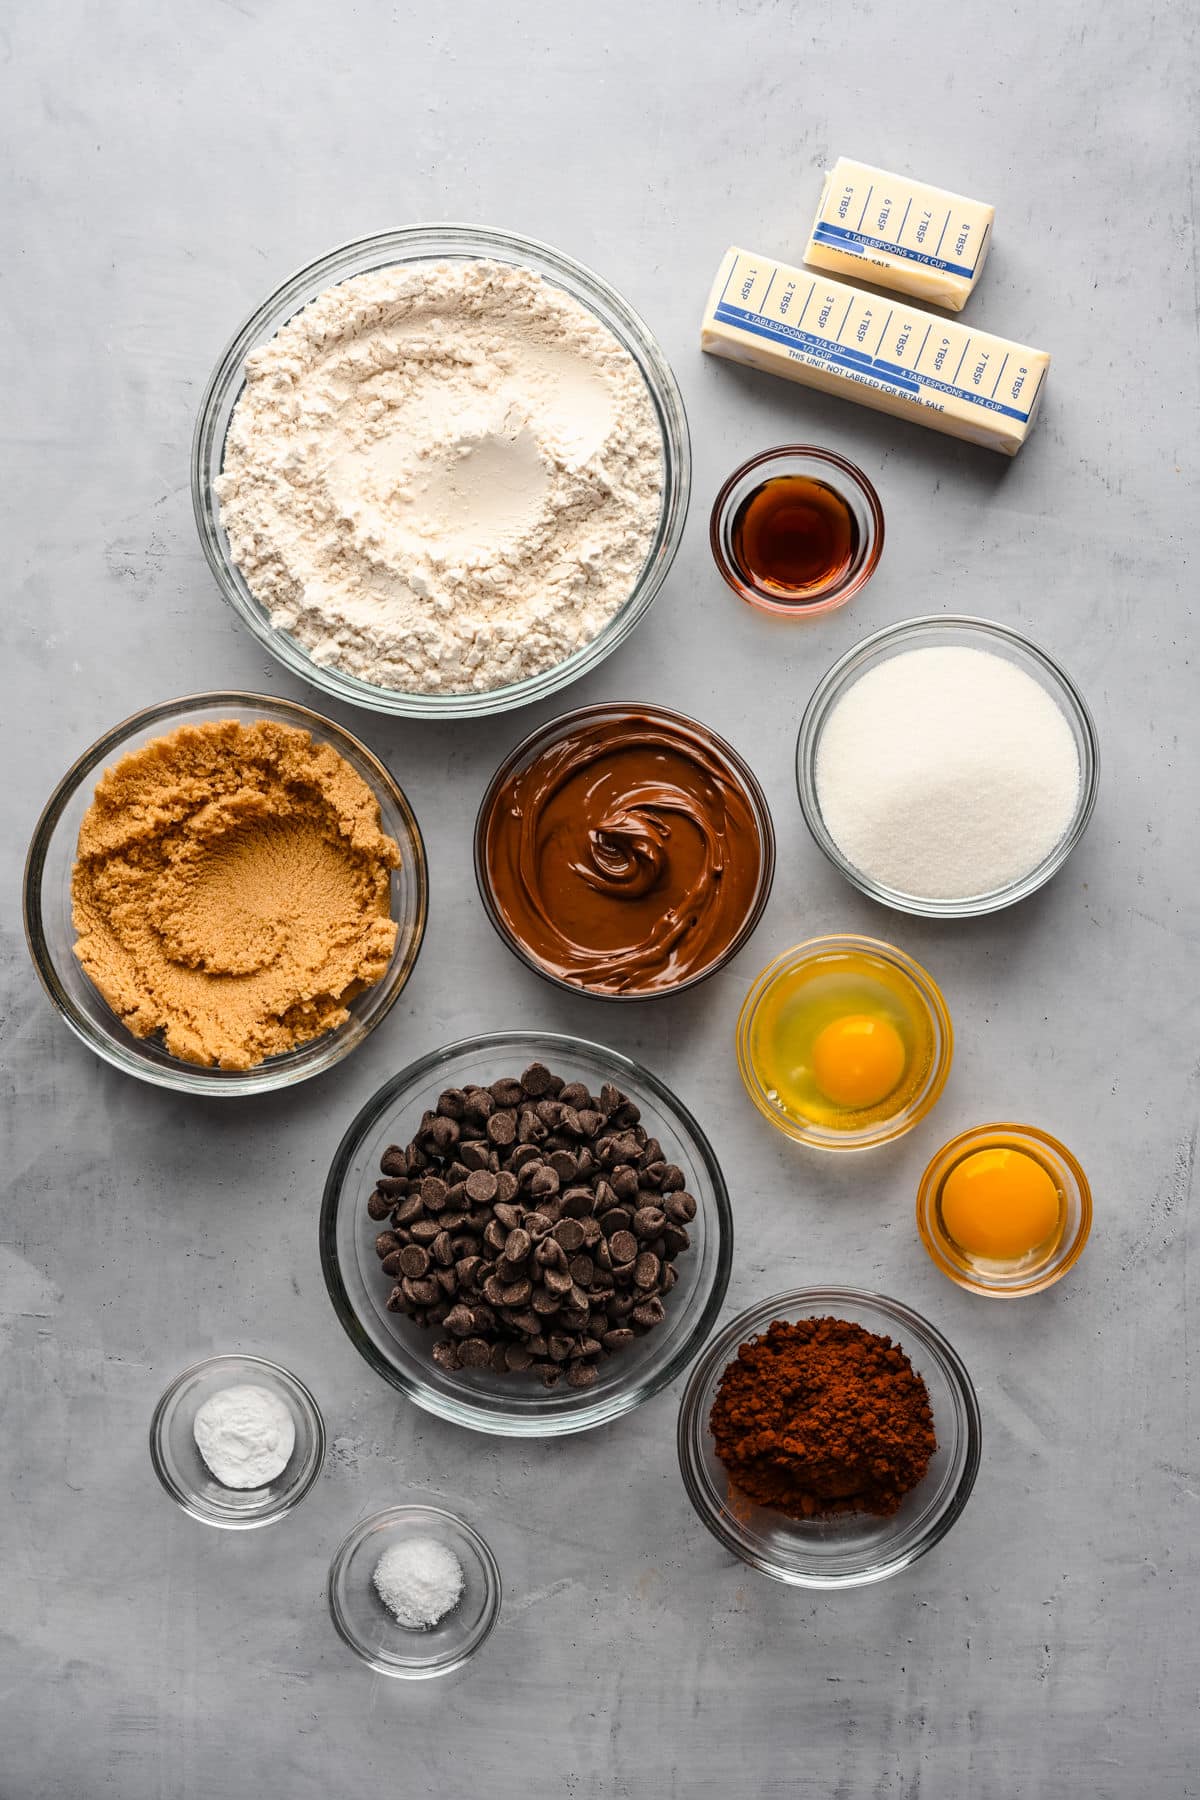 Ingredients for Nutella cookies in dishes.